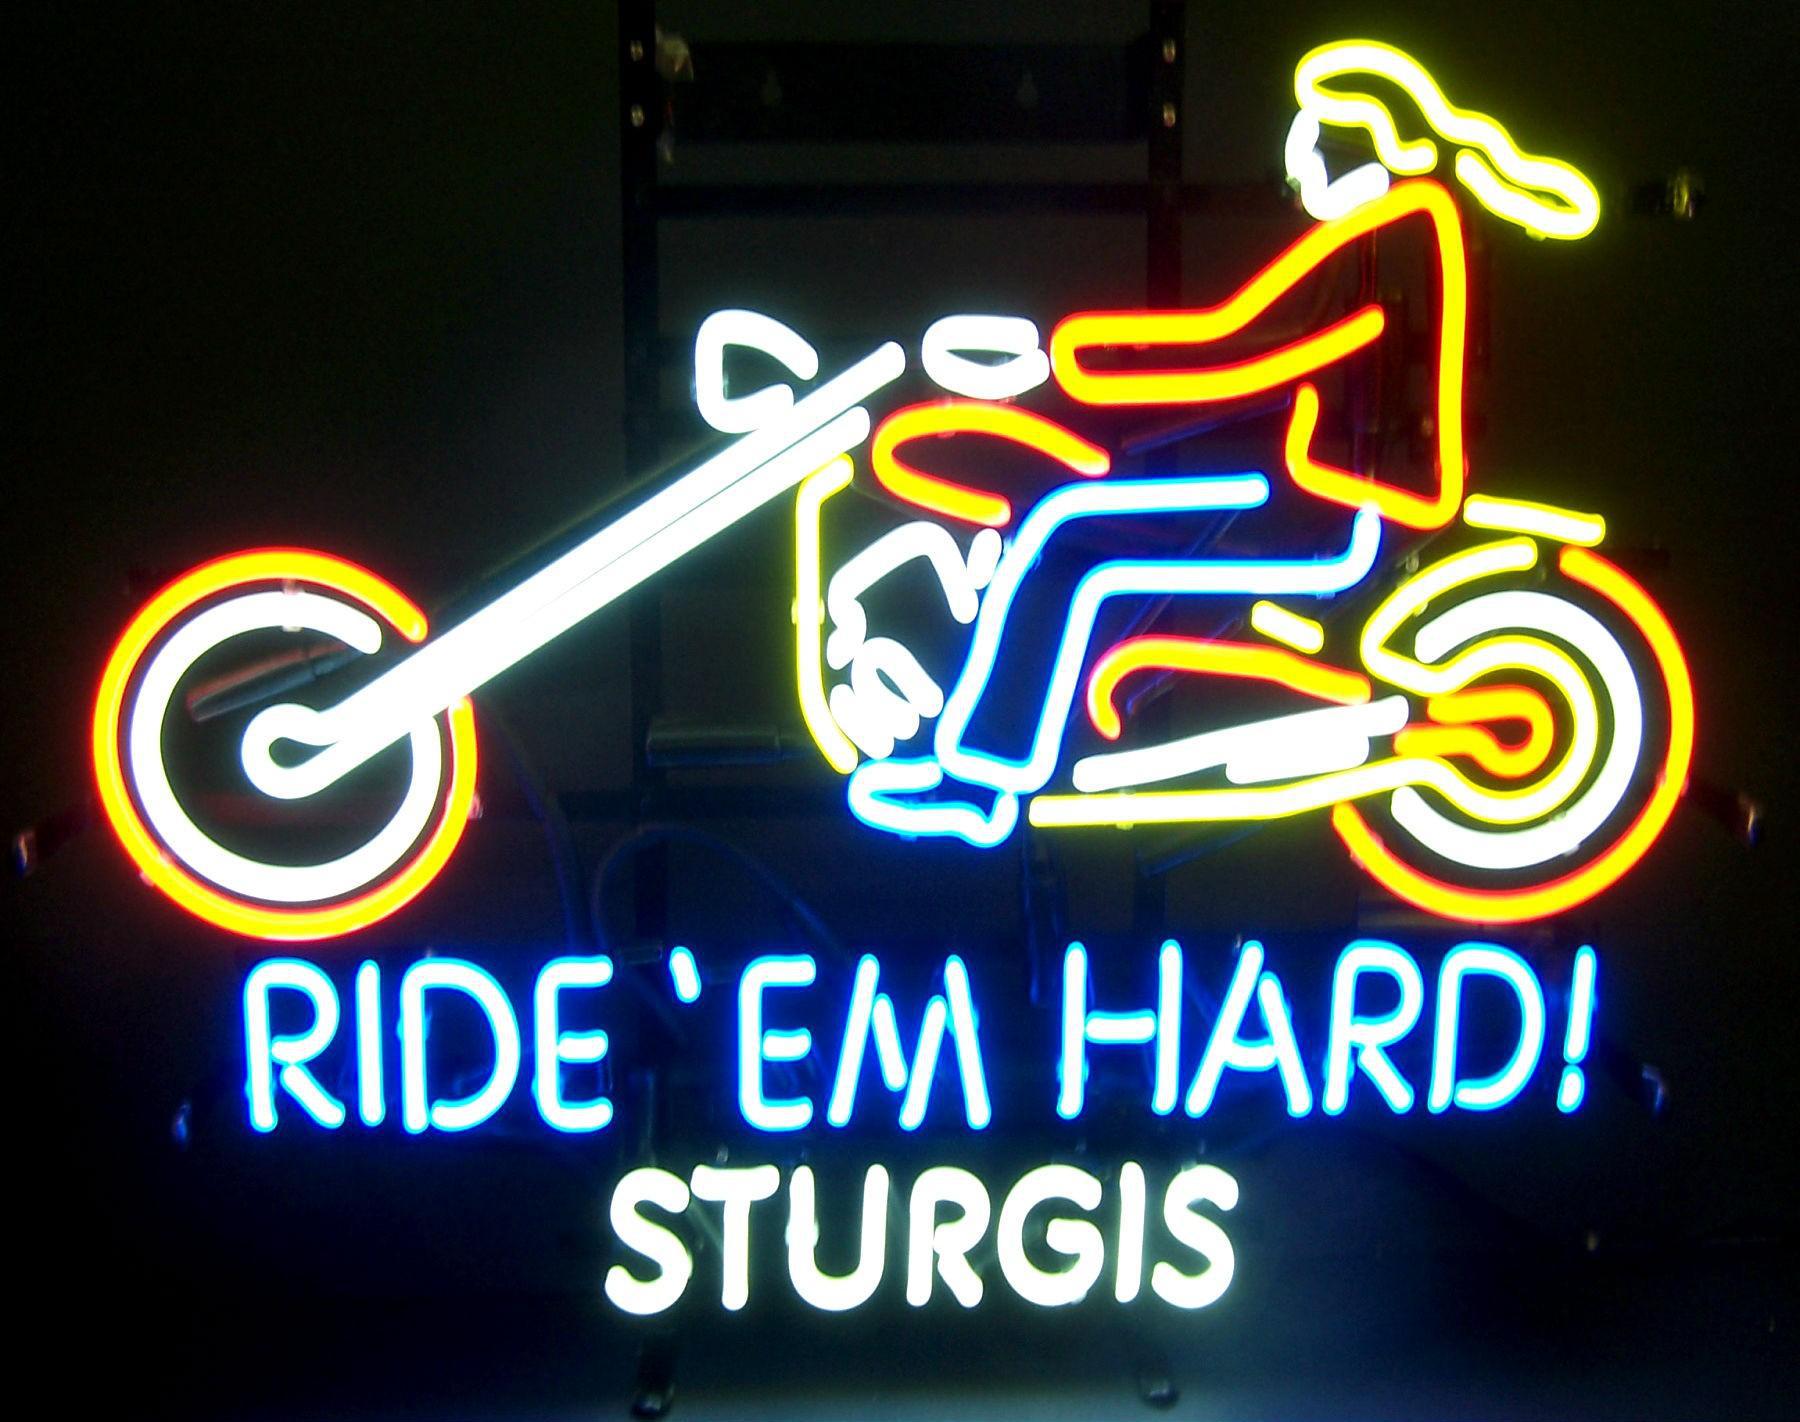 Neon to sturgis - (#98282) - High Quality and Resolution ...